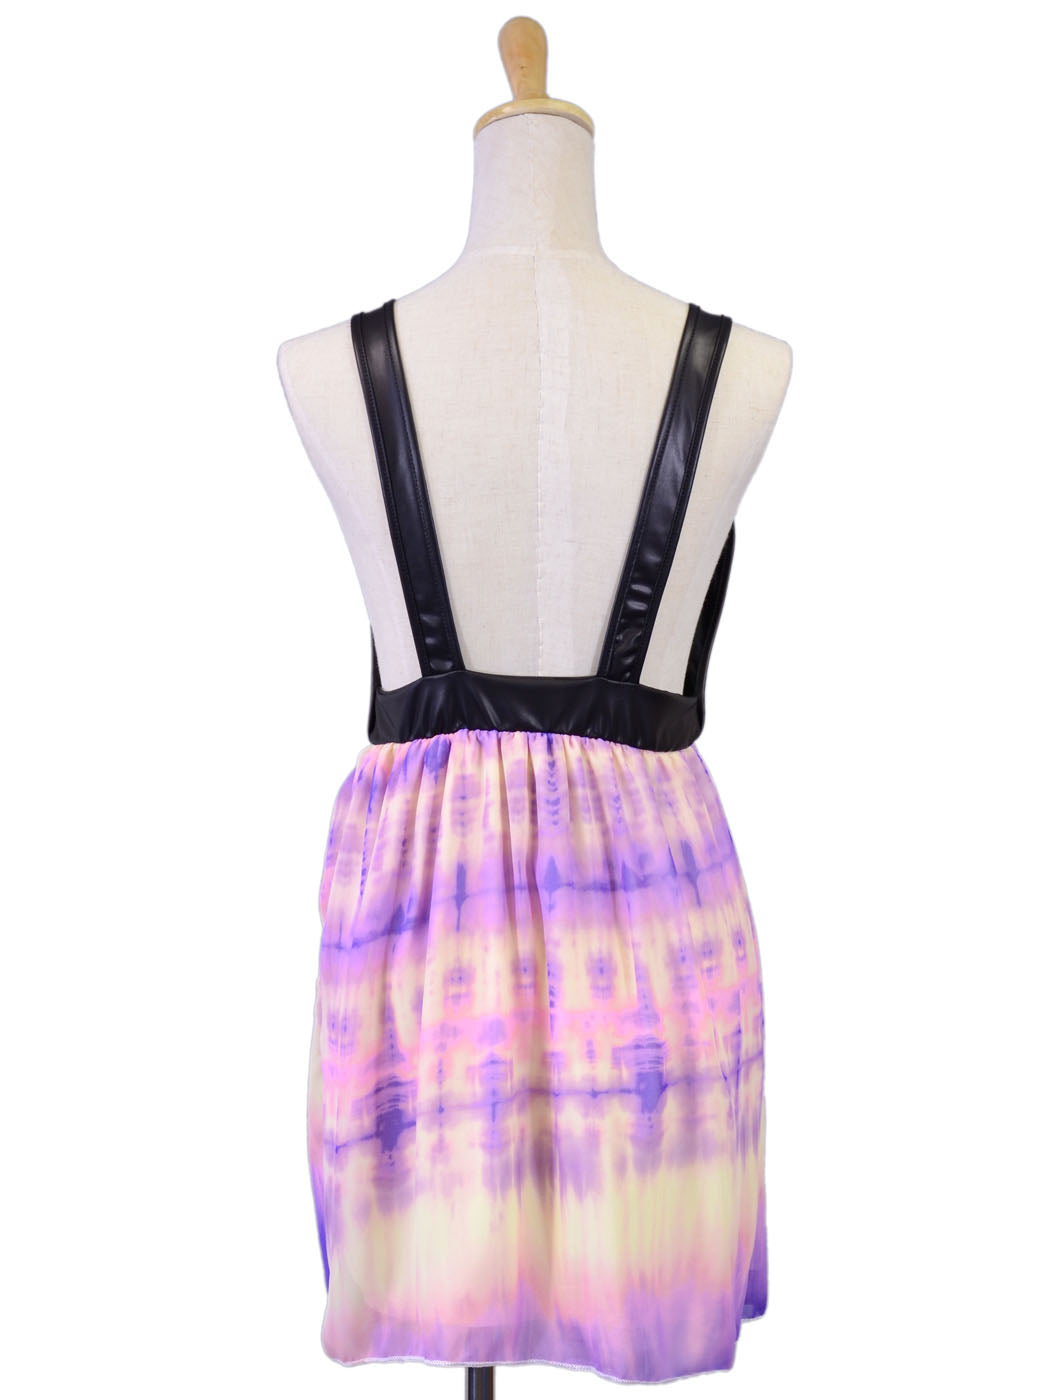 Tic Toc Faux Leather Top Overalls With Tie Dye Loose Chiffon Skirt - ALILANG.COM